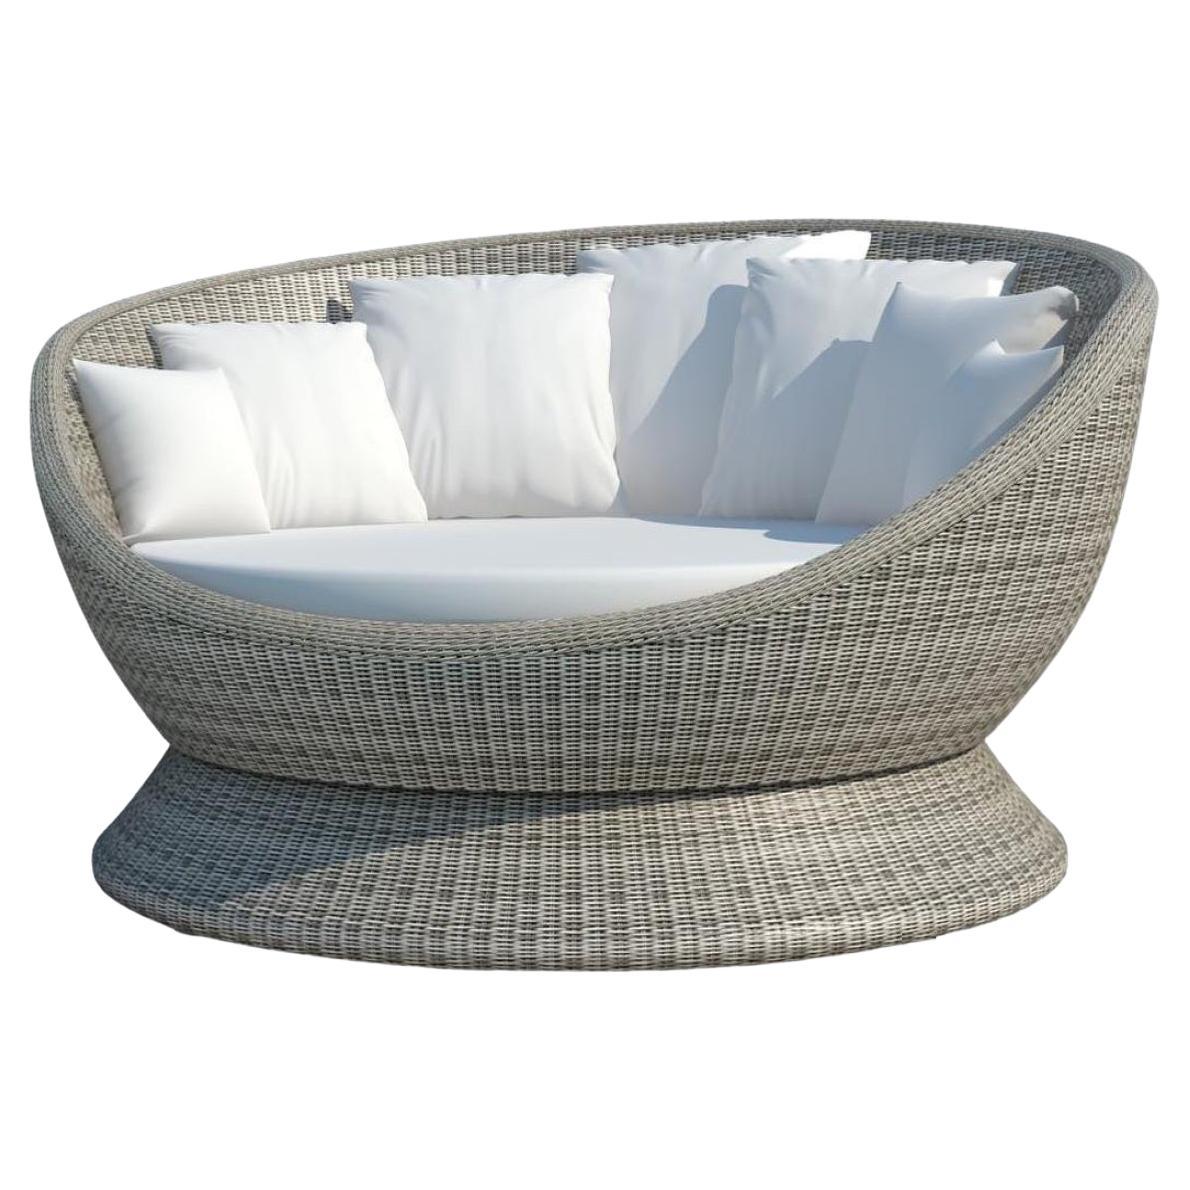 360° Rotating Outdoor Daybed In Stone Washed Wicker For Sale